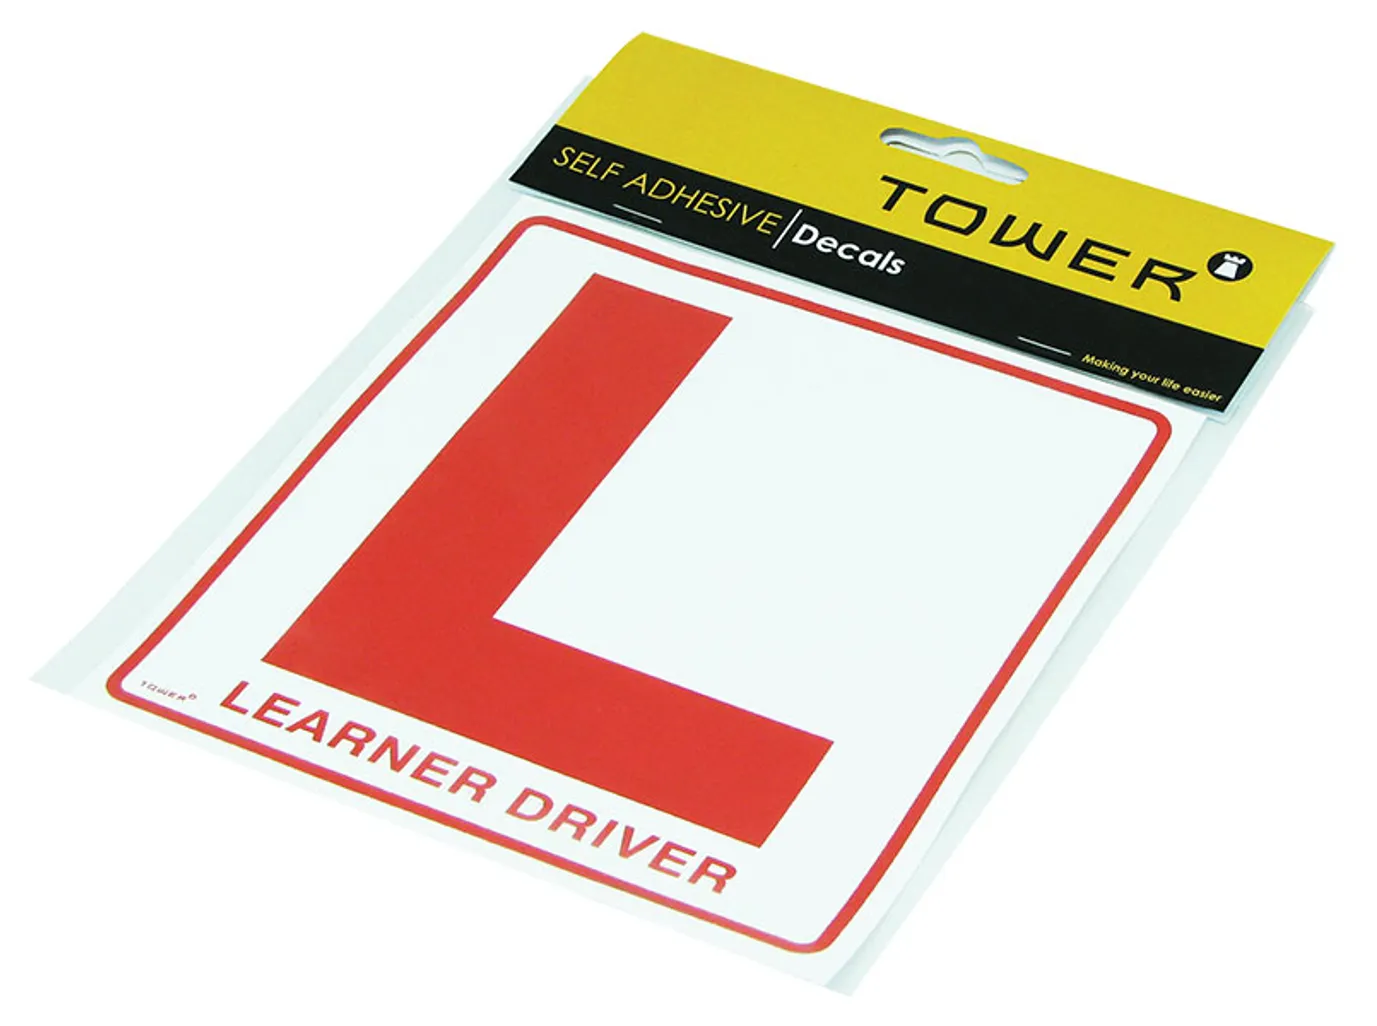 learner decal & sign